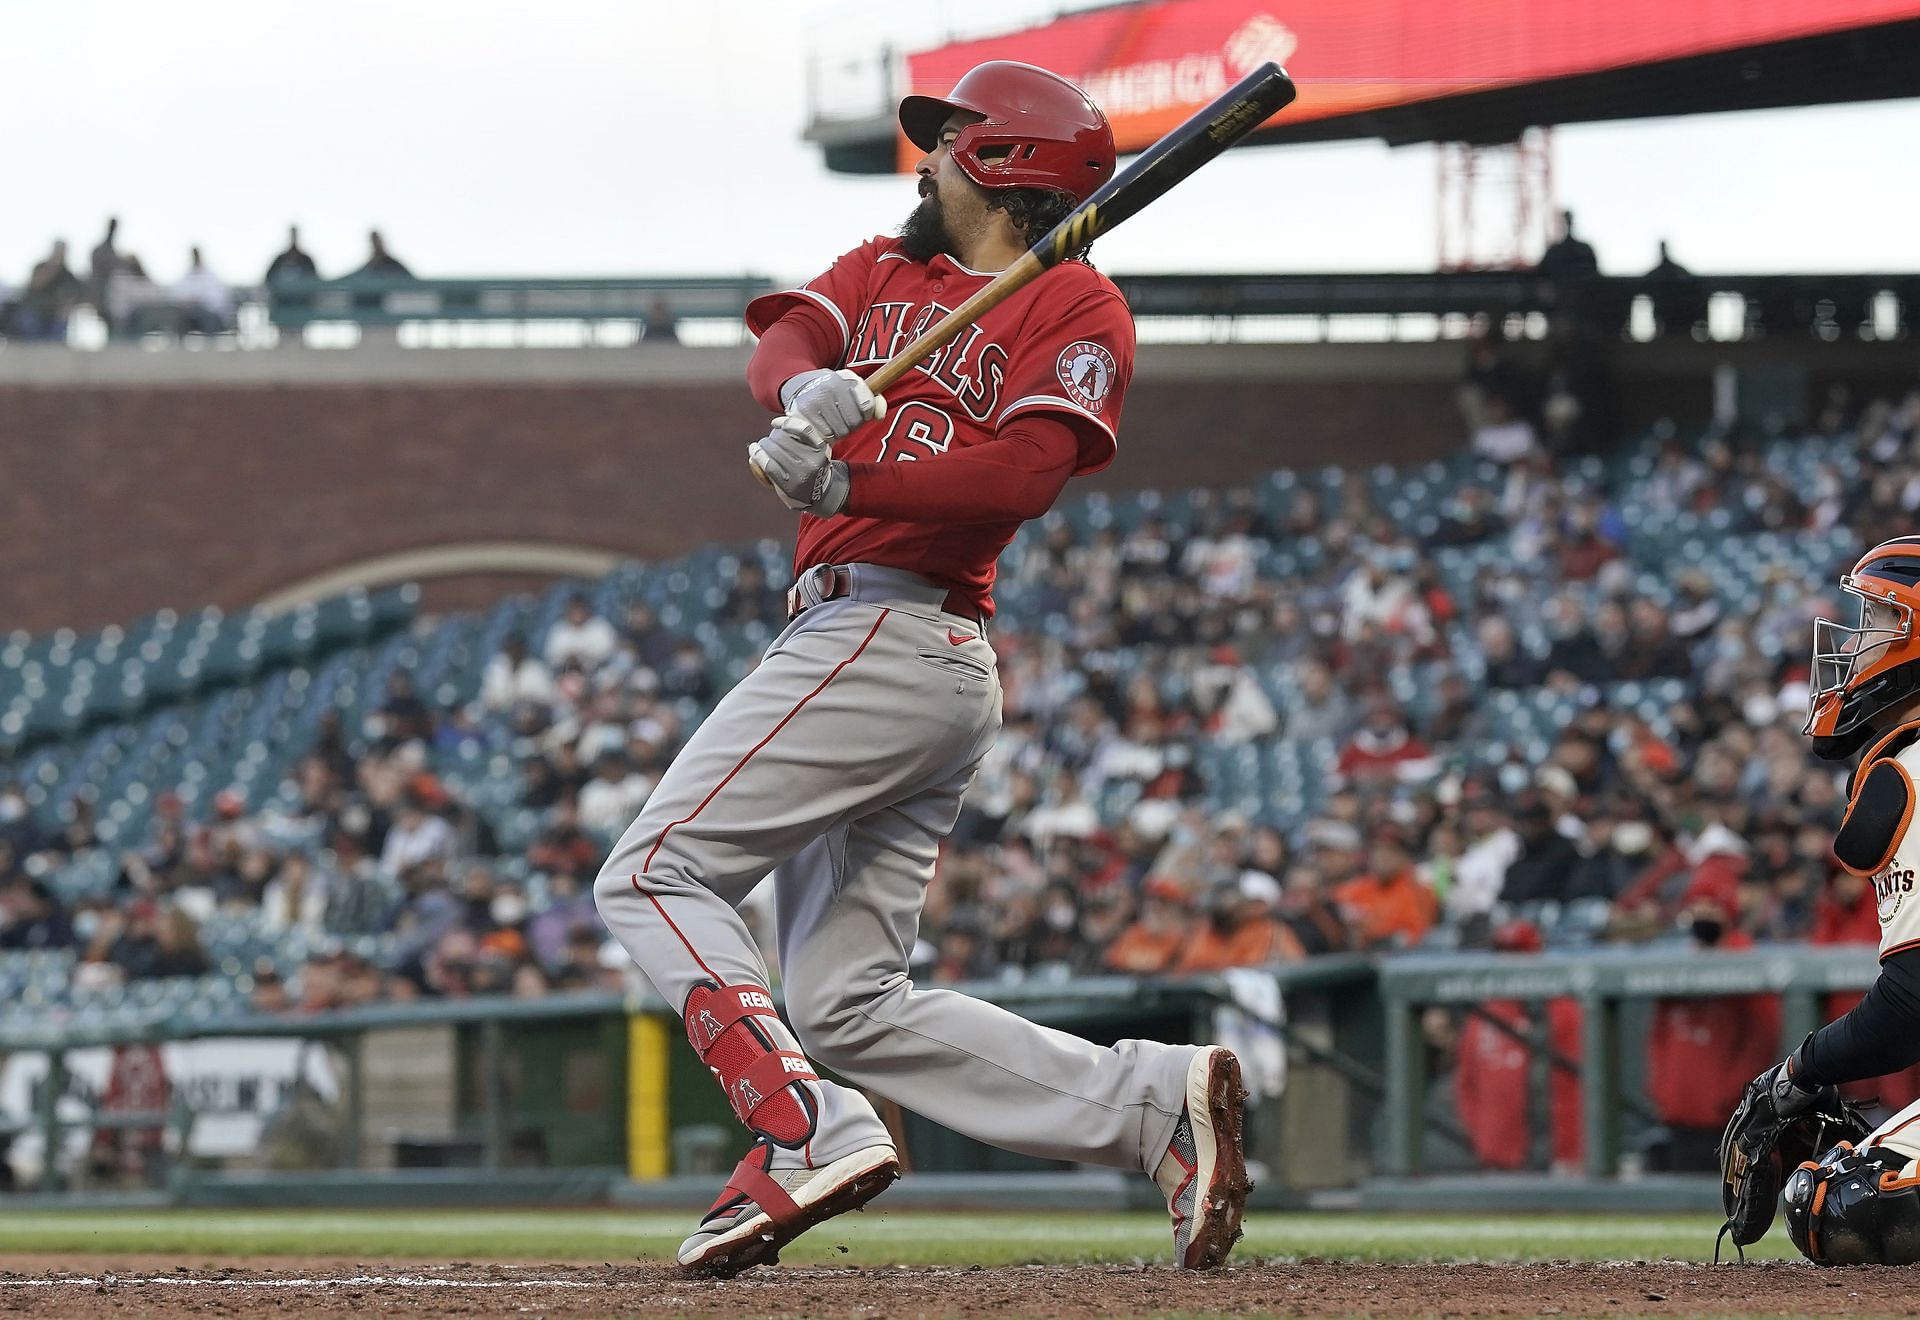 Anthony Rendon of the Los Angeles Angels hits a bases loaded three-run RBI double against the San Francisco Giants.